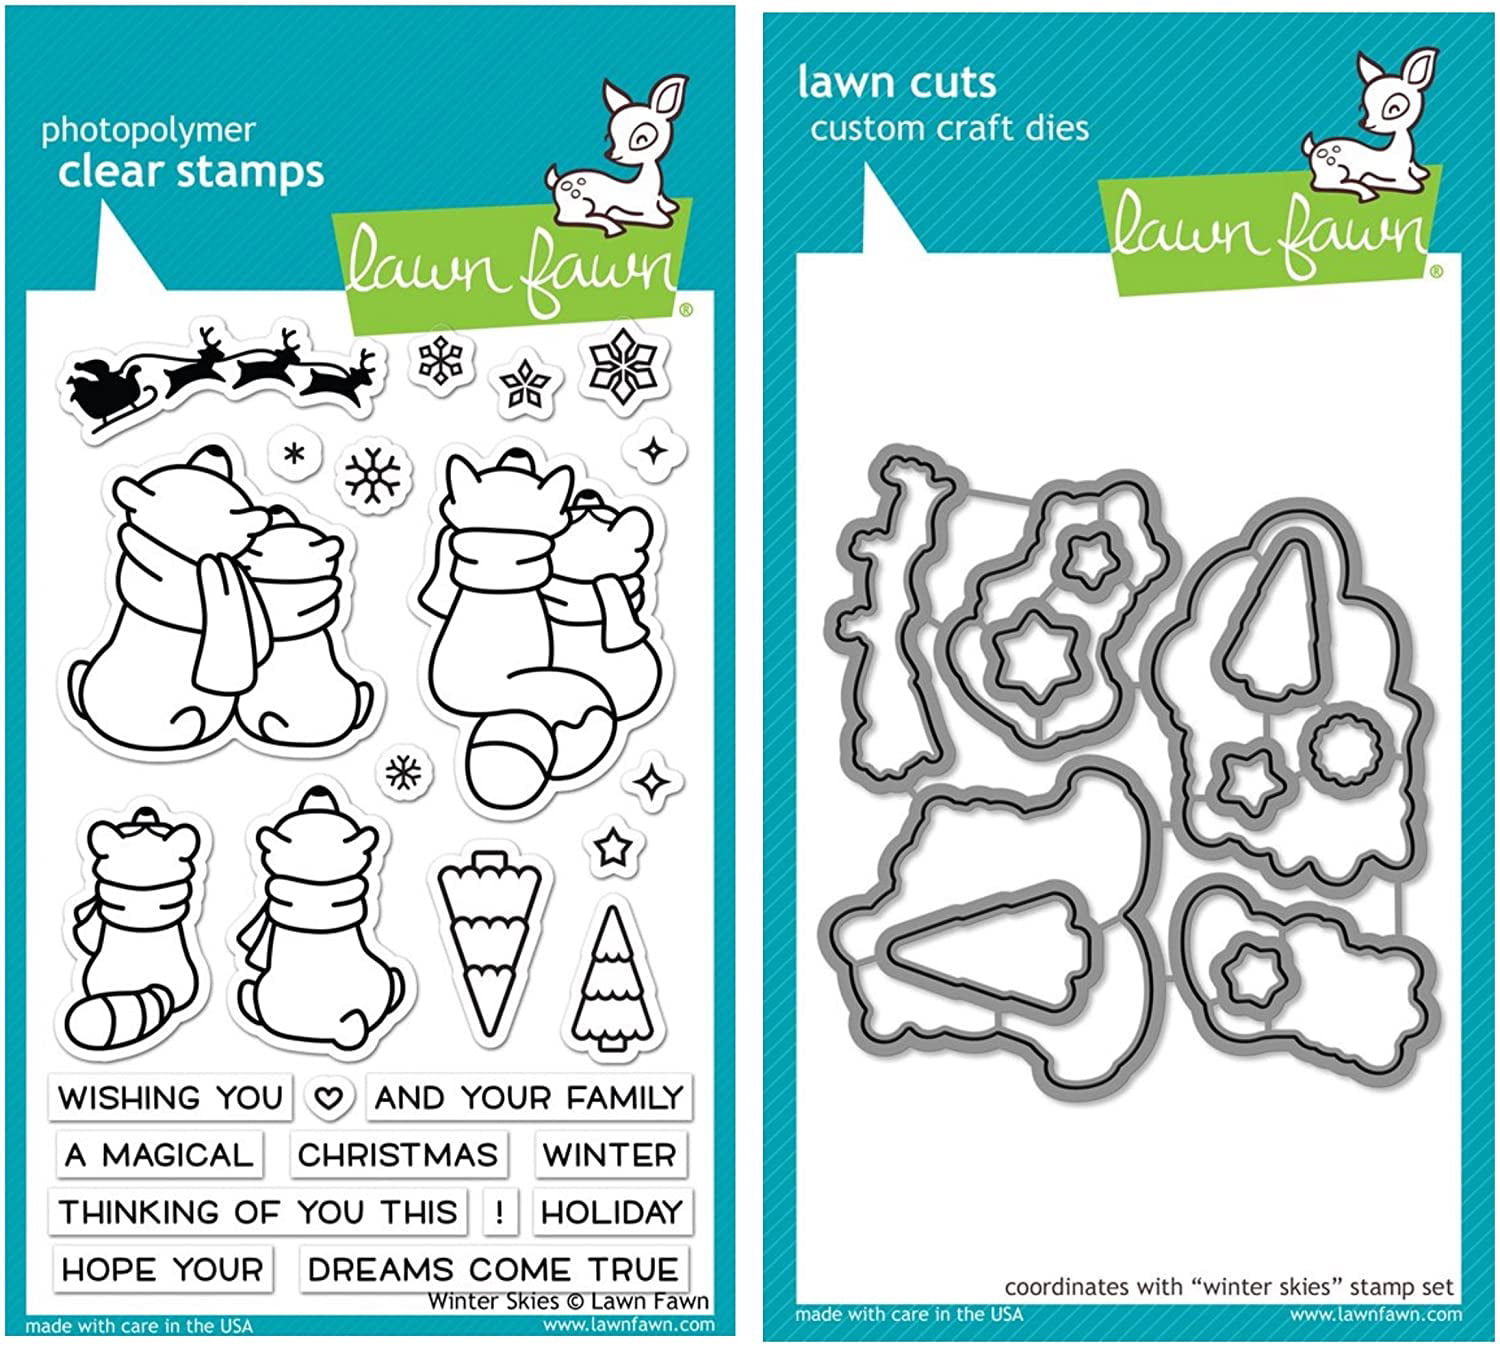 Lawn Fawn "WINTER SKIES" Clear Stamps Only OR Stamp and Die Bundle 